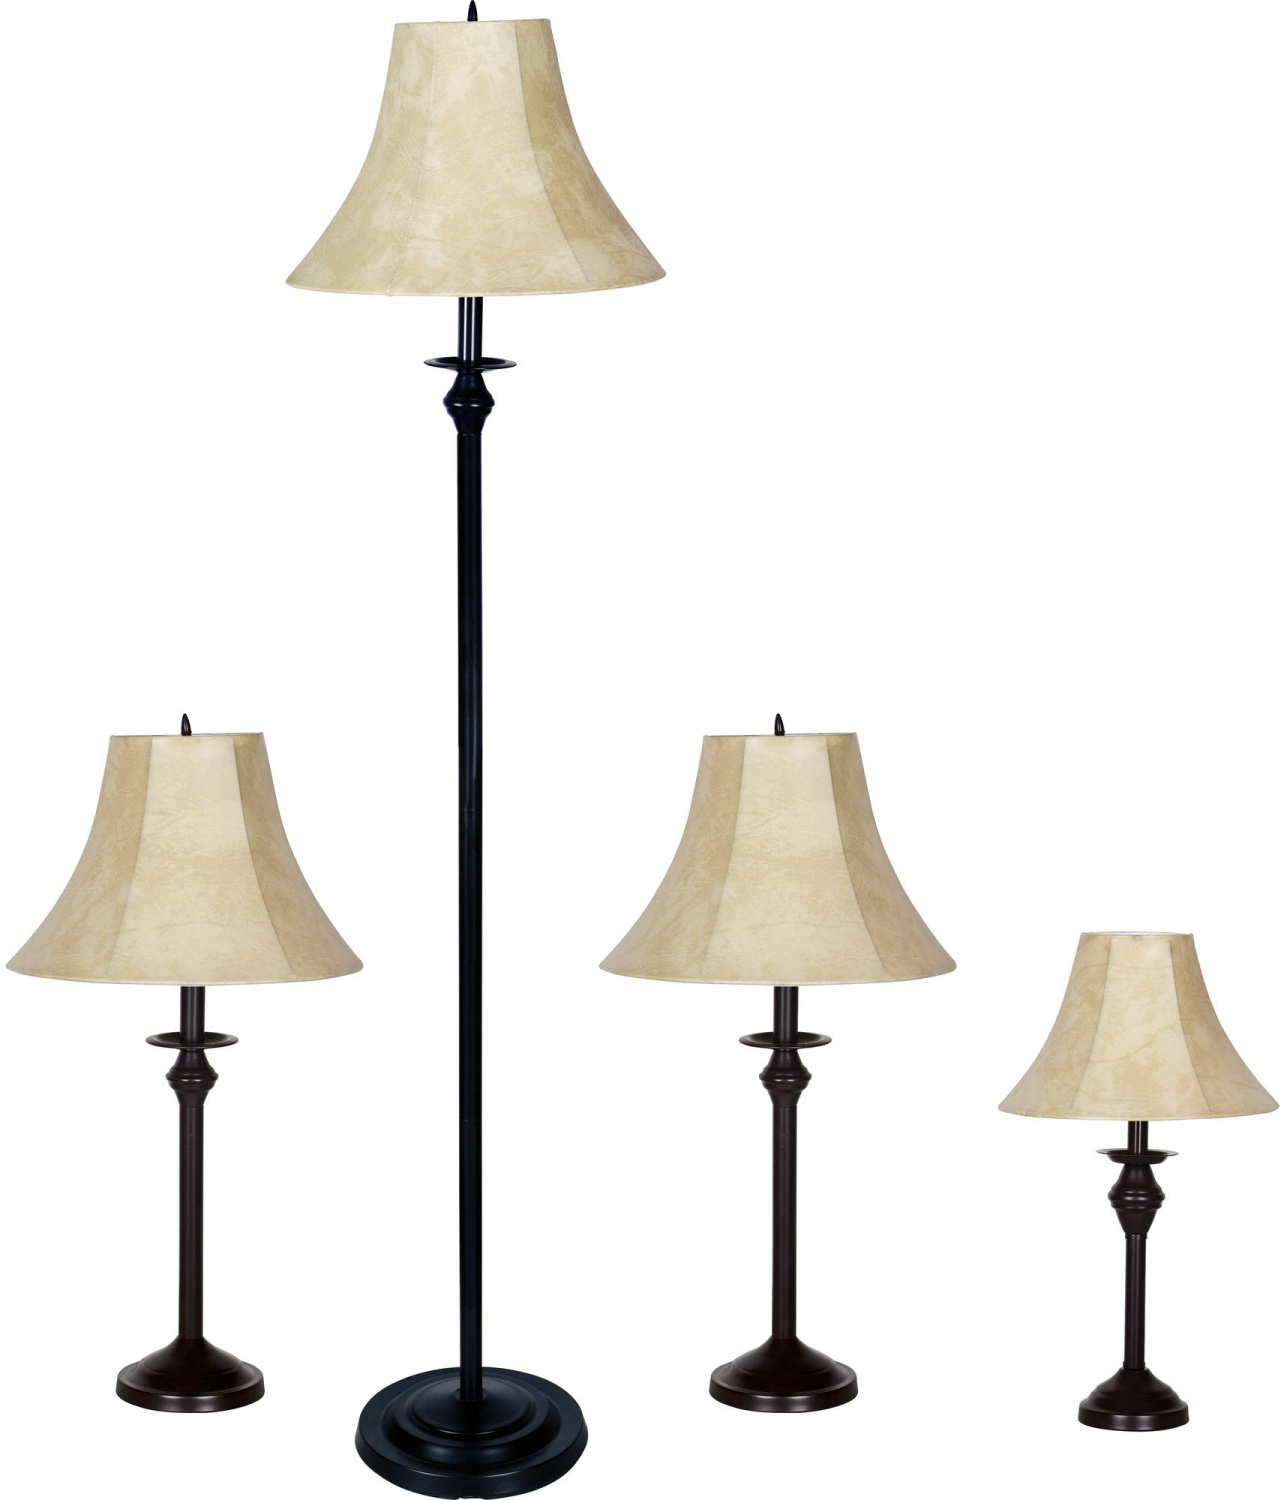 Details About 4 Piece Lamp Set Bronze Finish Vintage Light Floor Table Accent Lamps in proportions 1284 X 1500